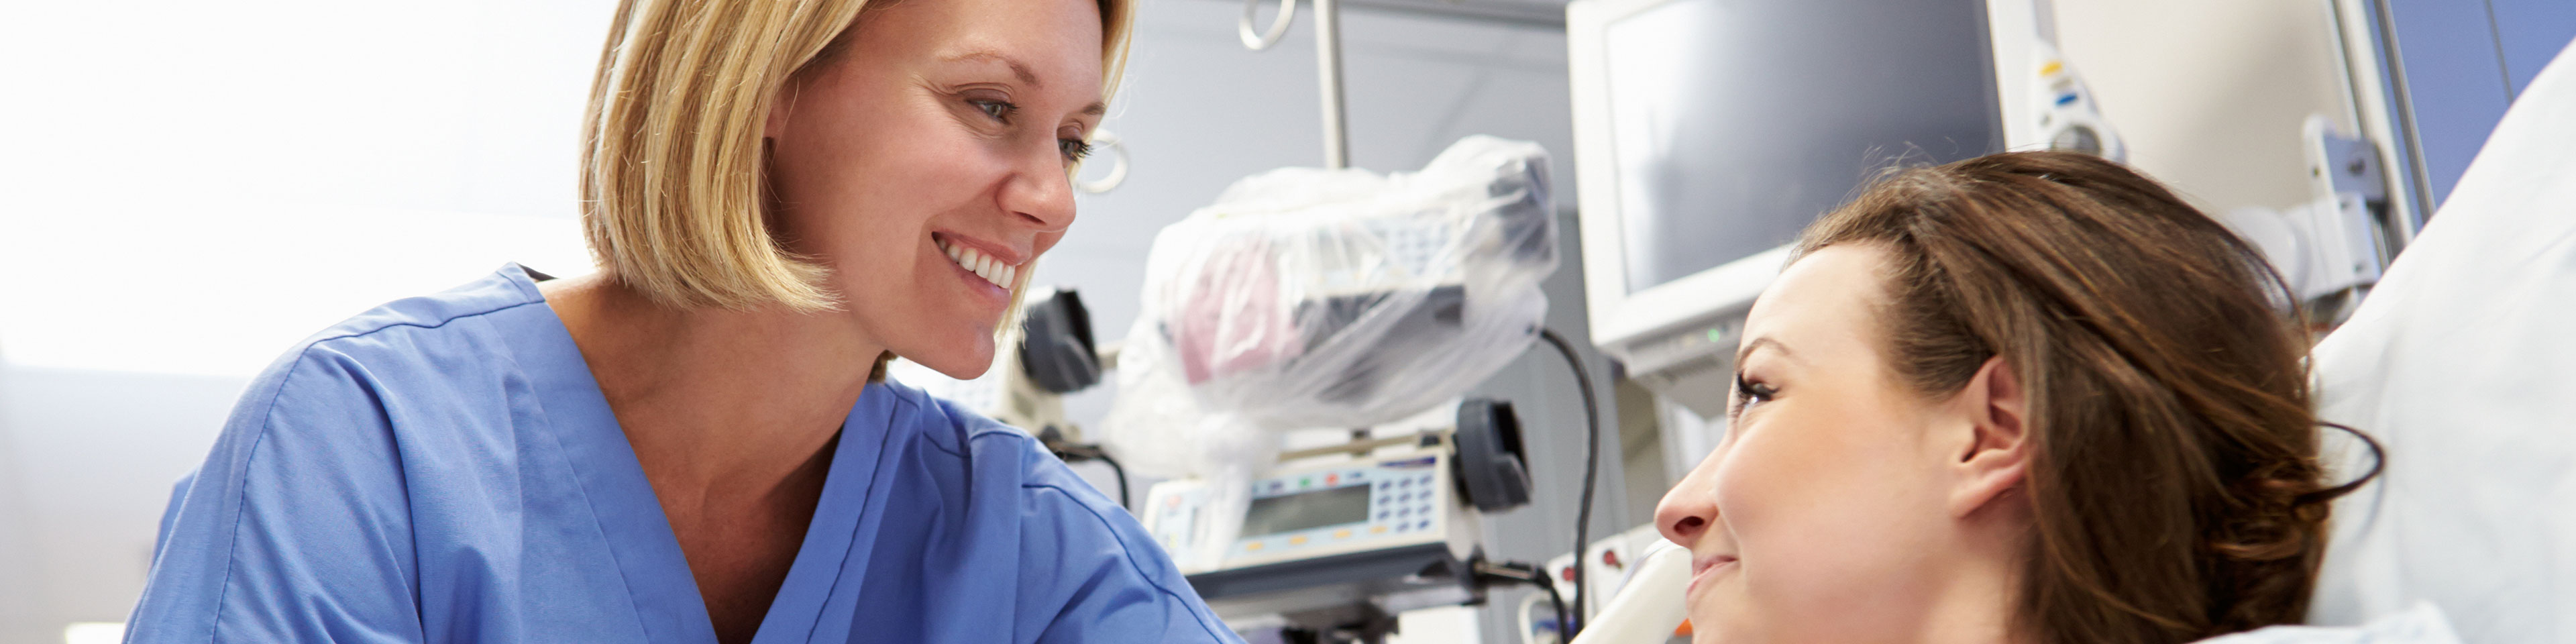 22 of the best nursing jobs you can get after you graduate